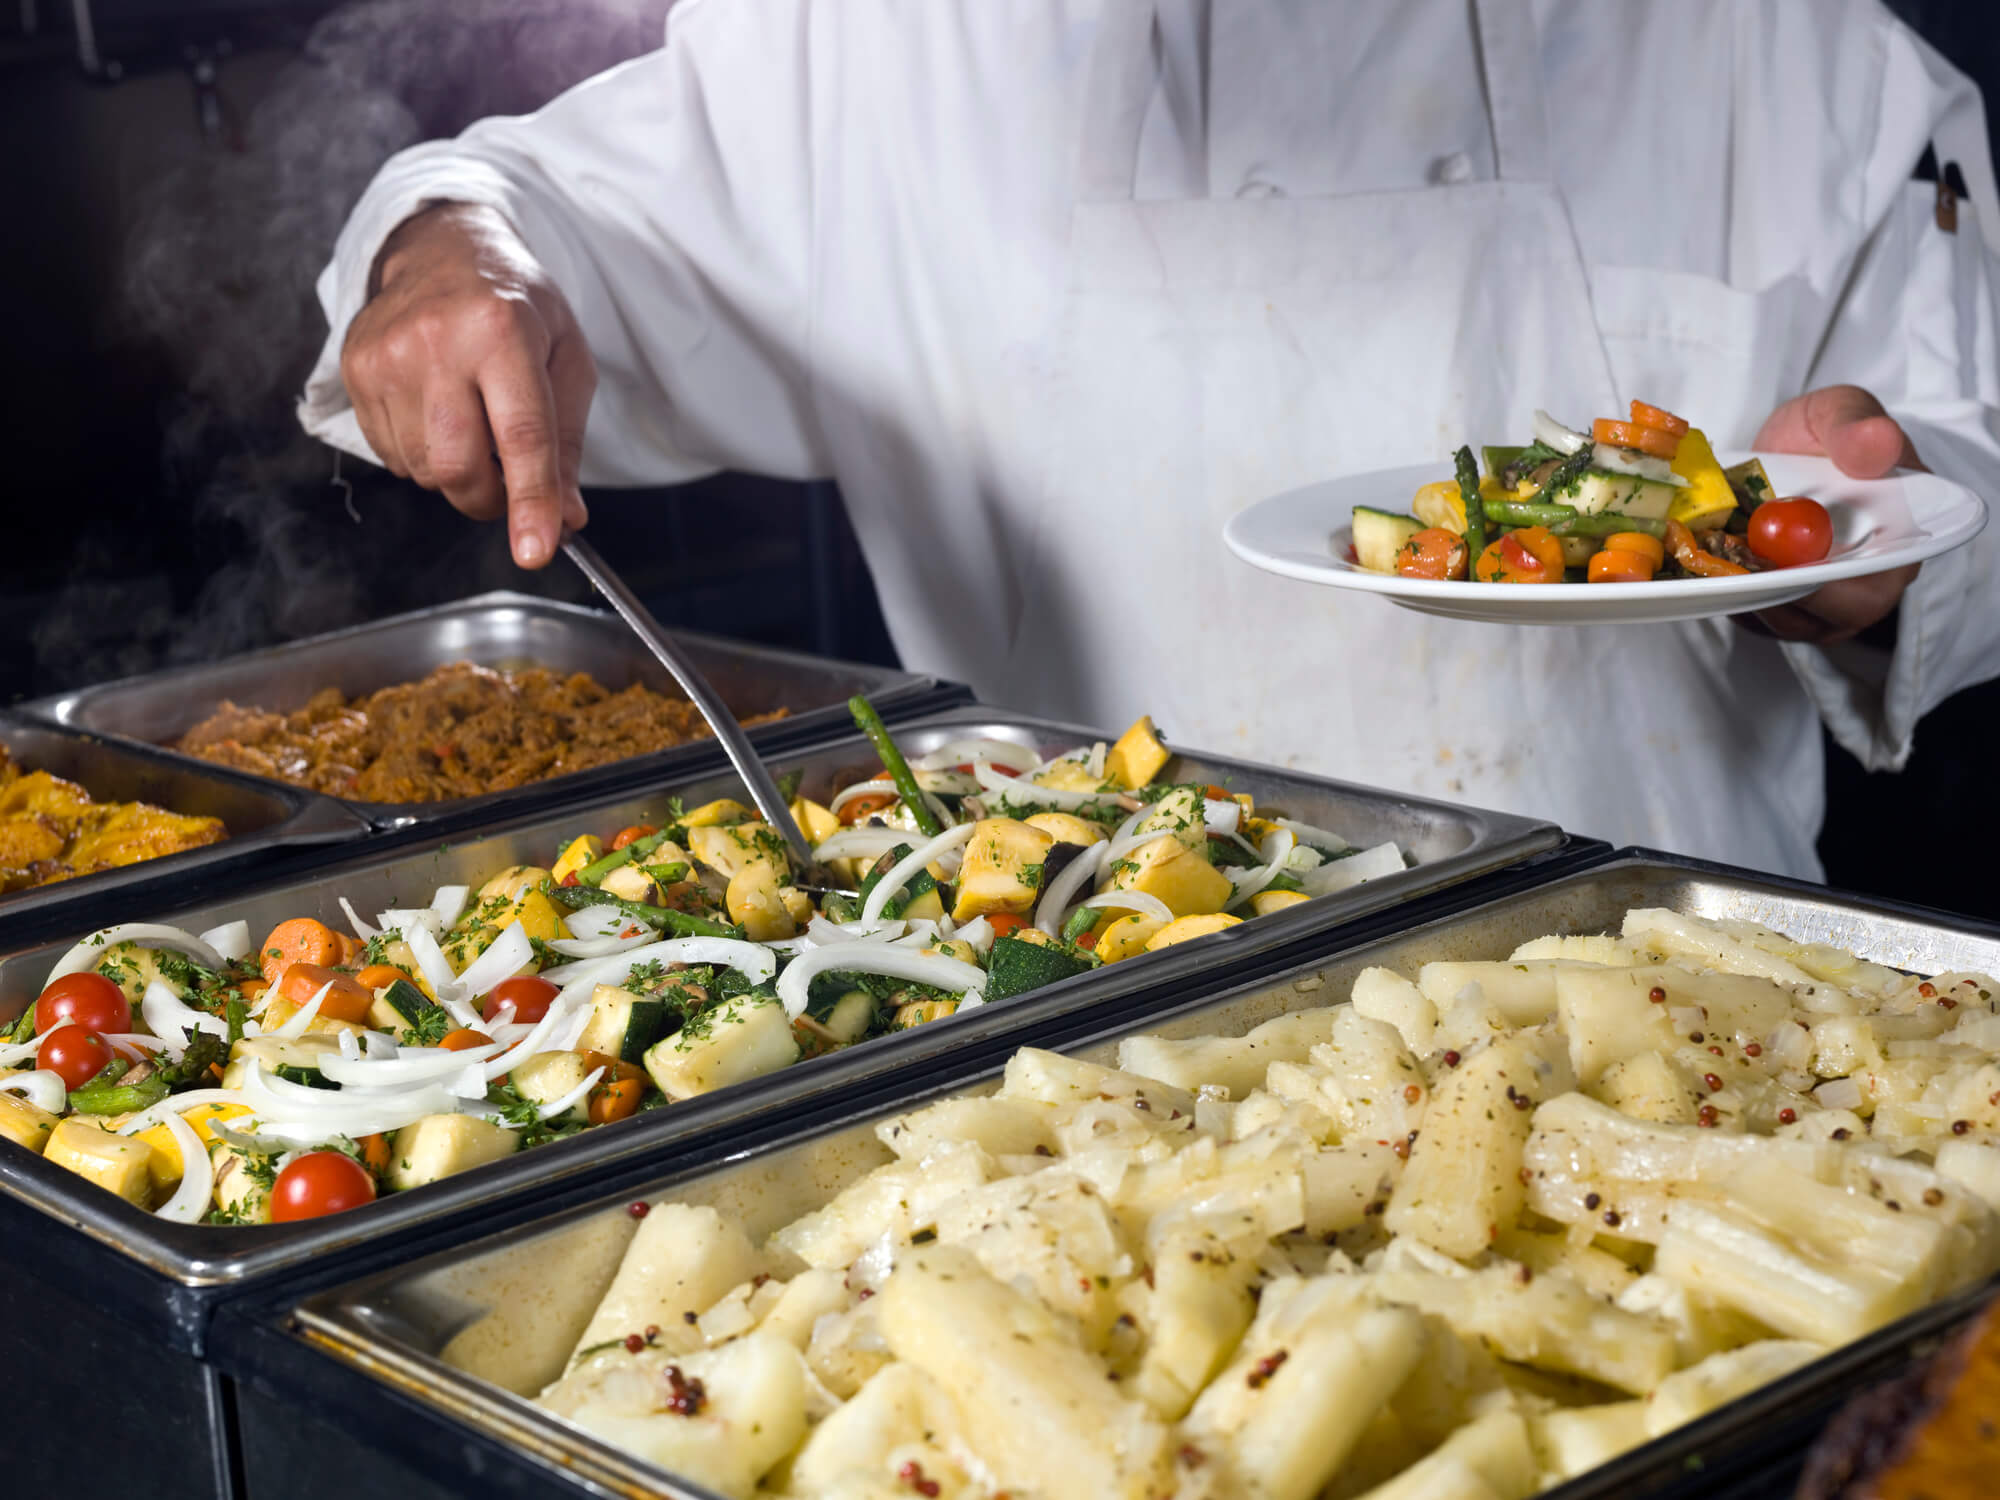 blunch and dinner catering services in portsmouth nh